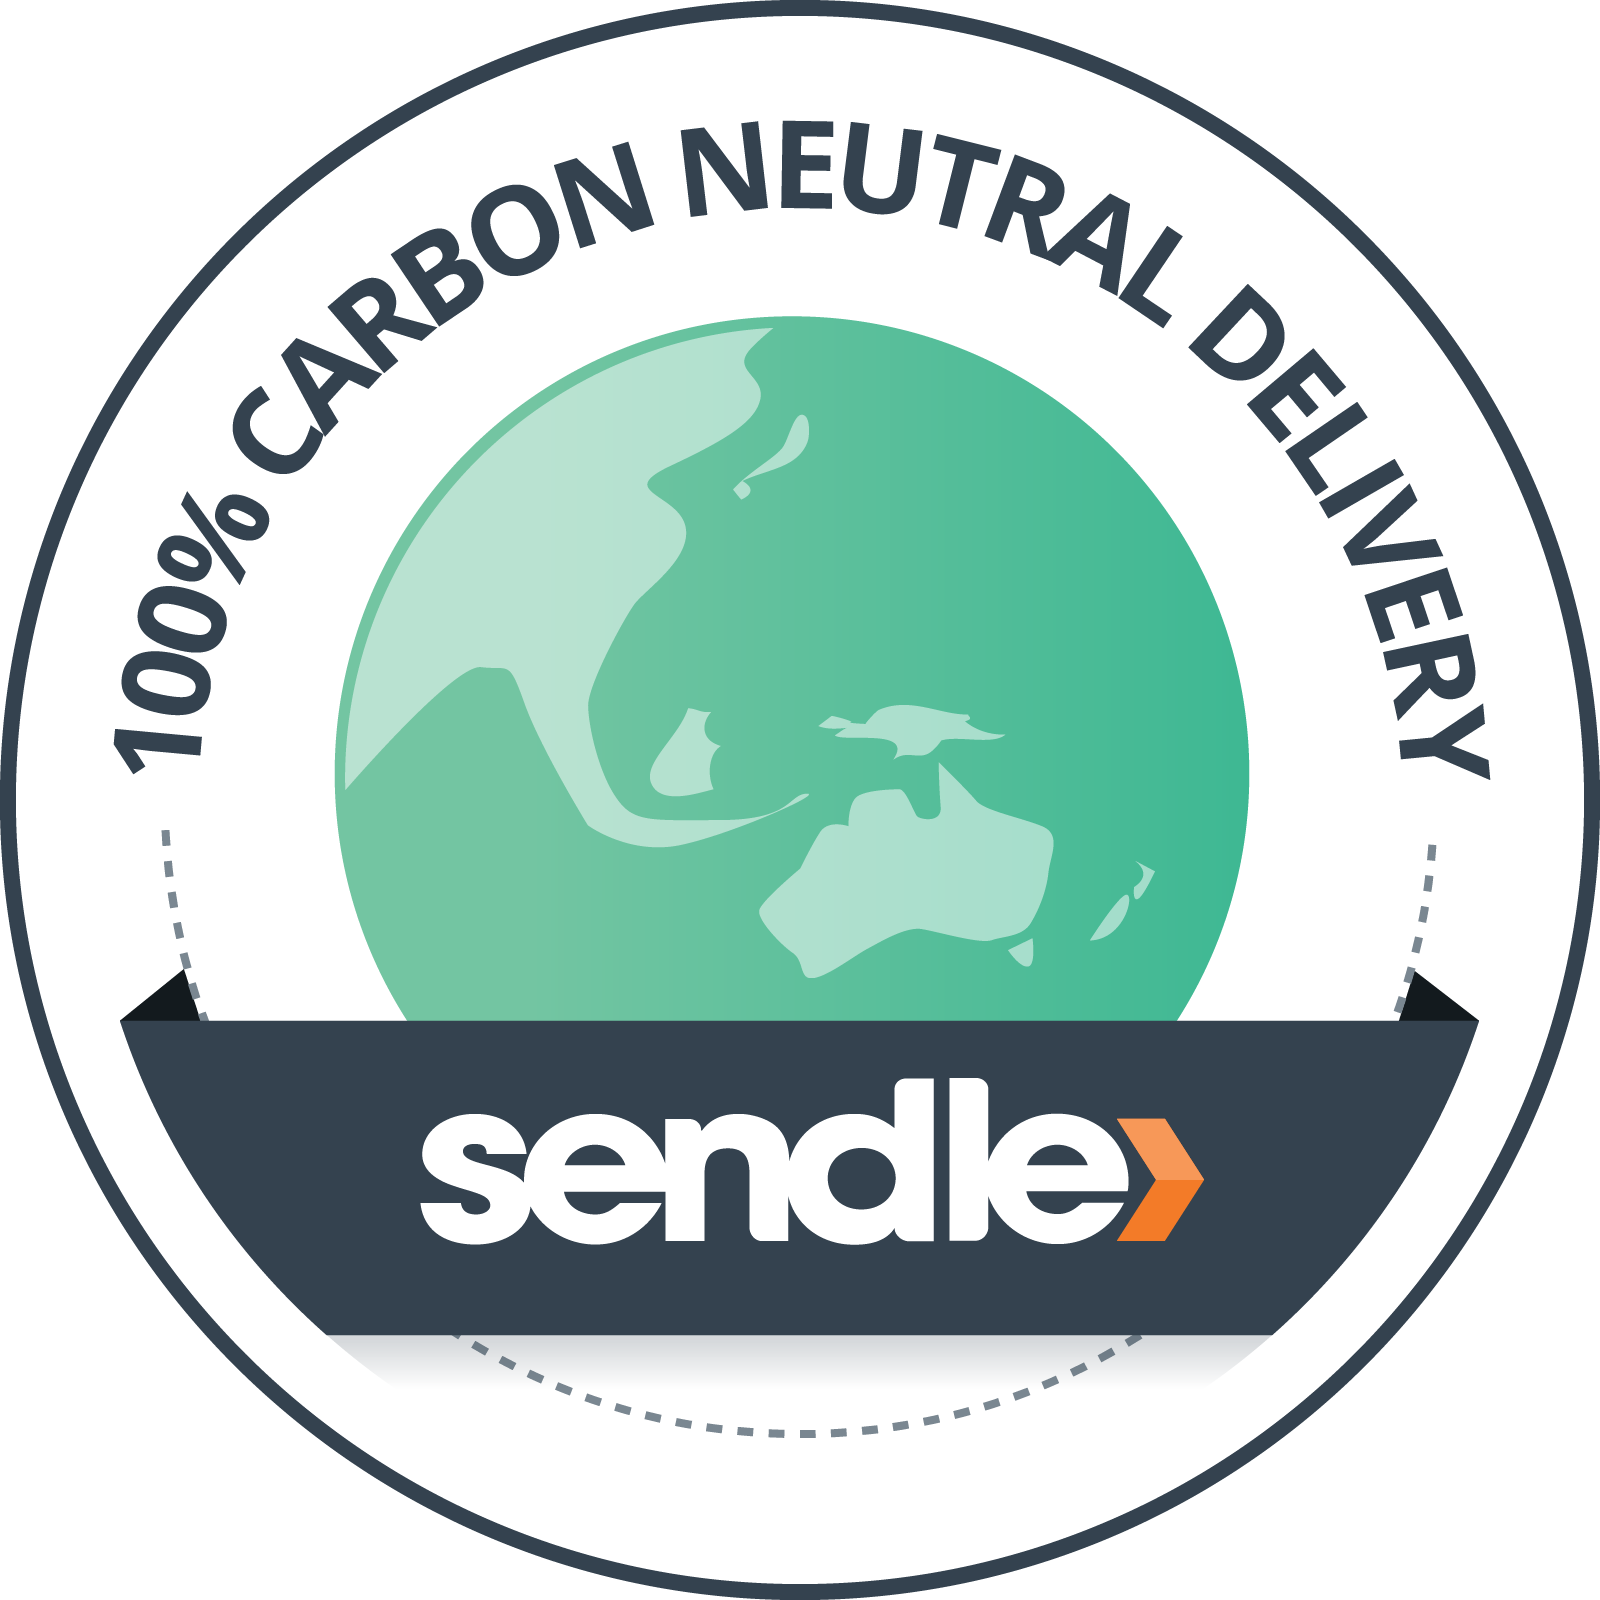 100% Carbon Neutral Delivery